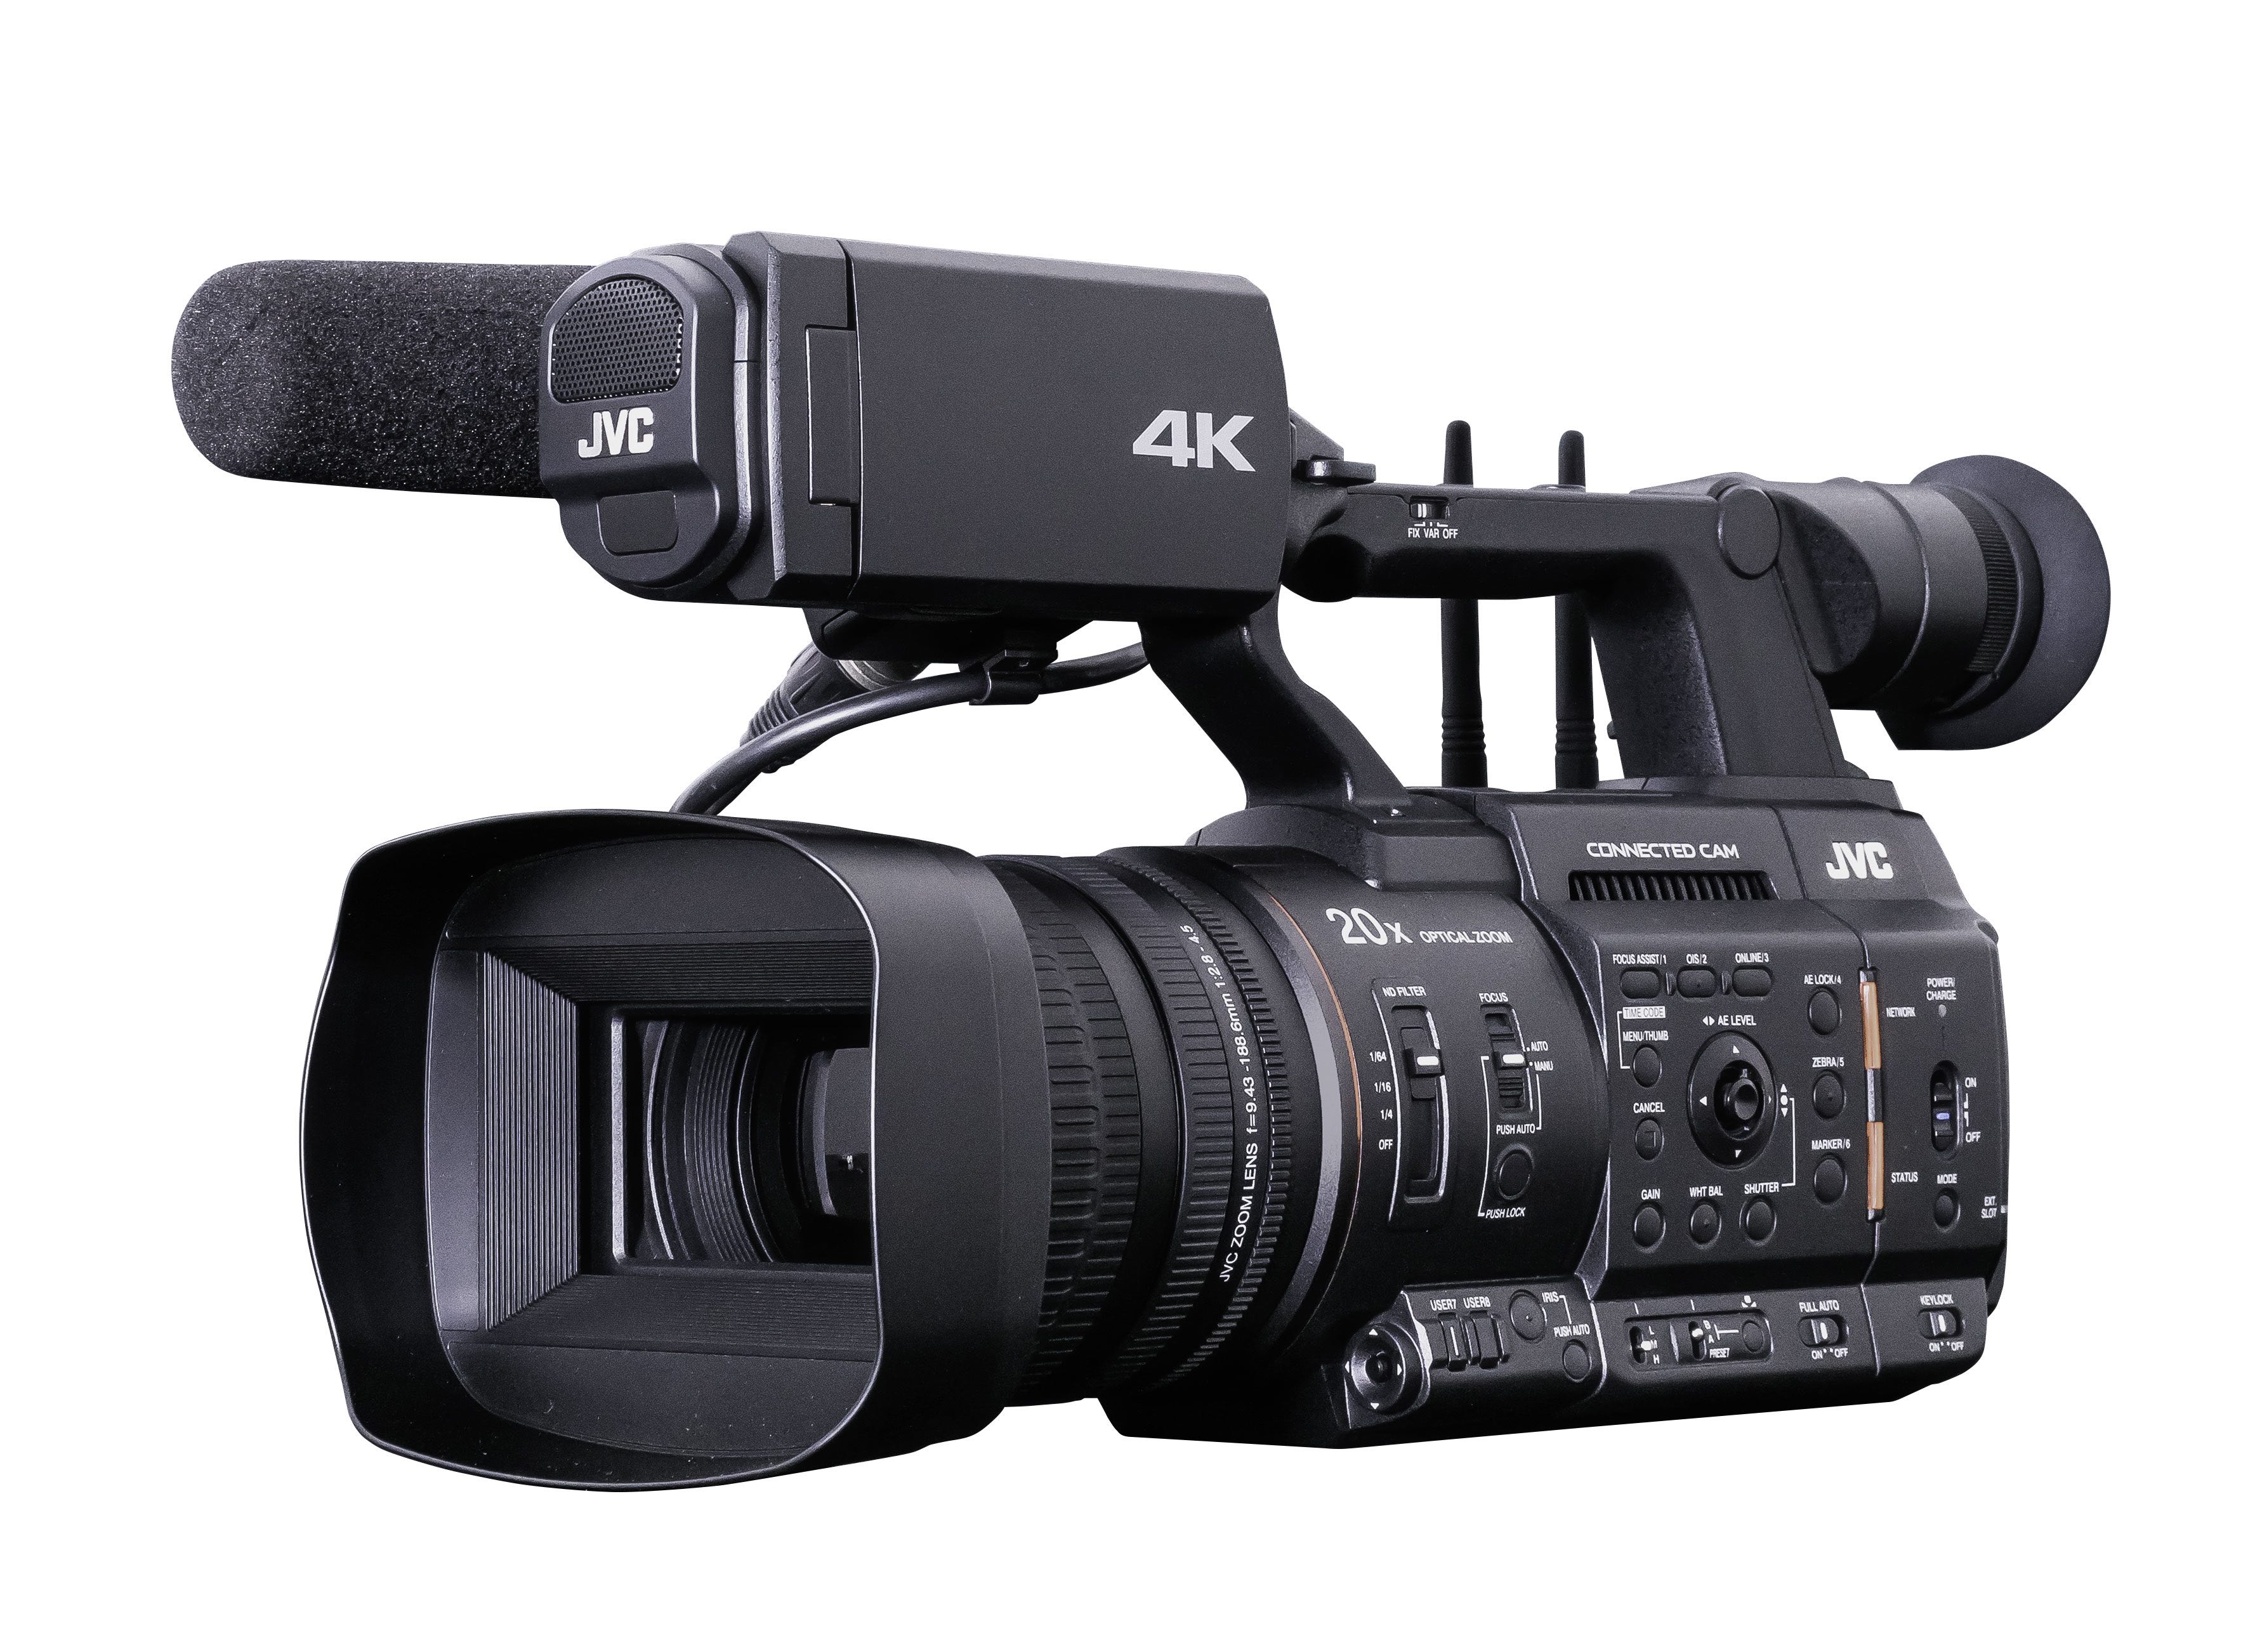 JVC GY-HC500 and GY-HC550 4K cameras - Newsshooter